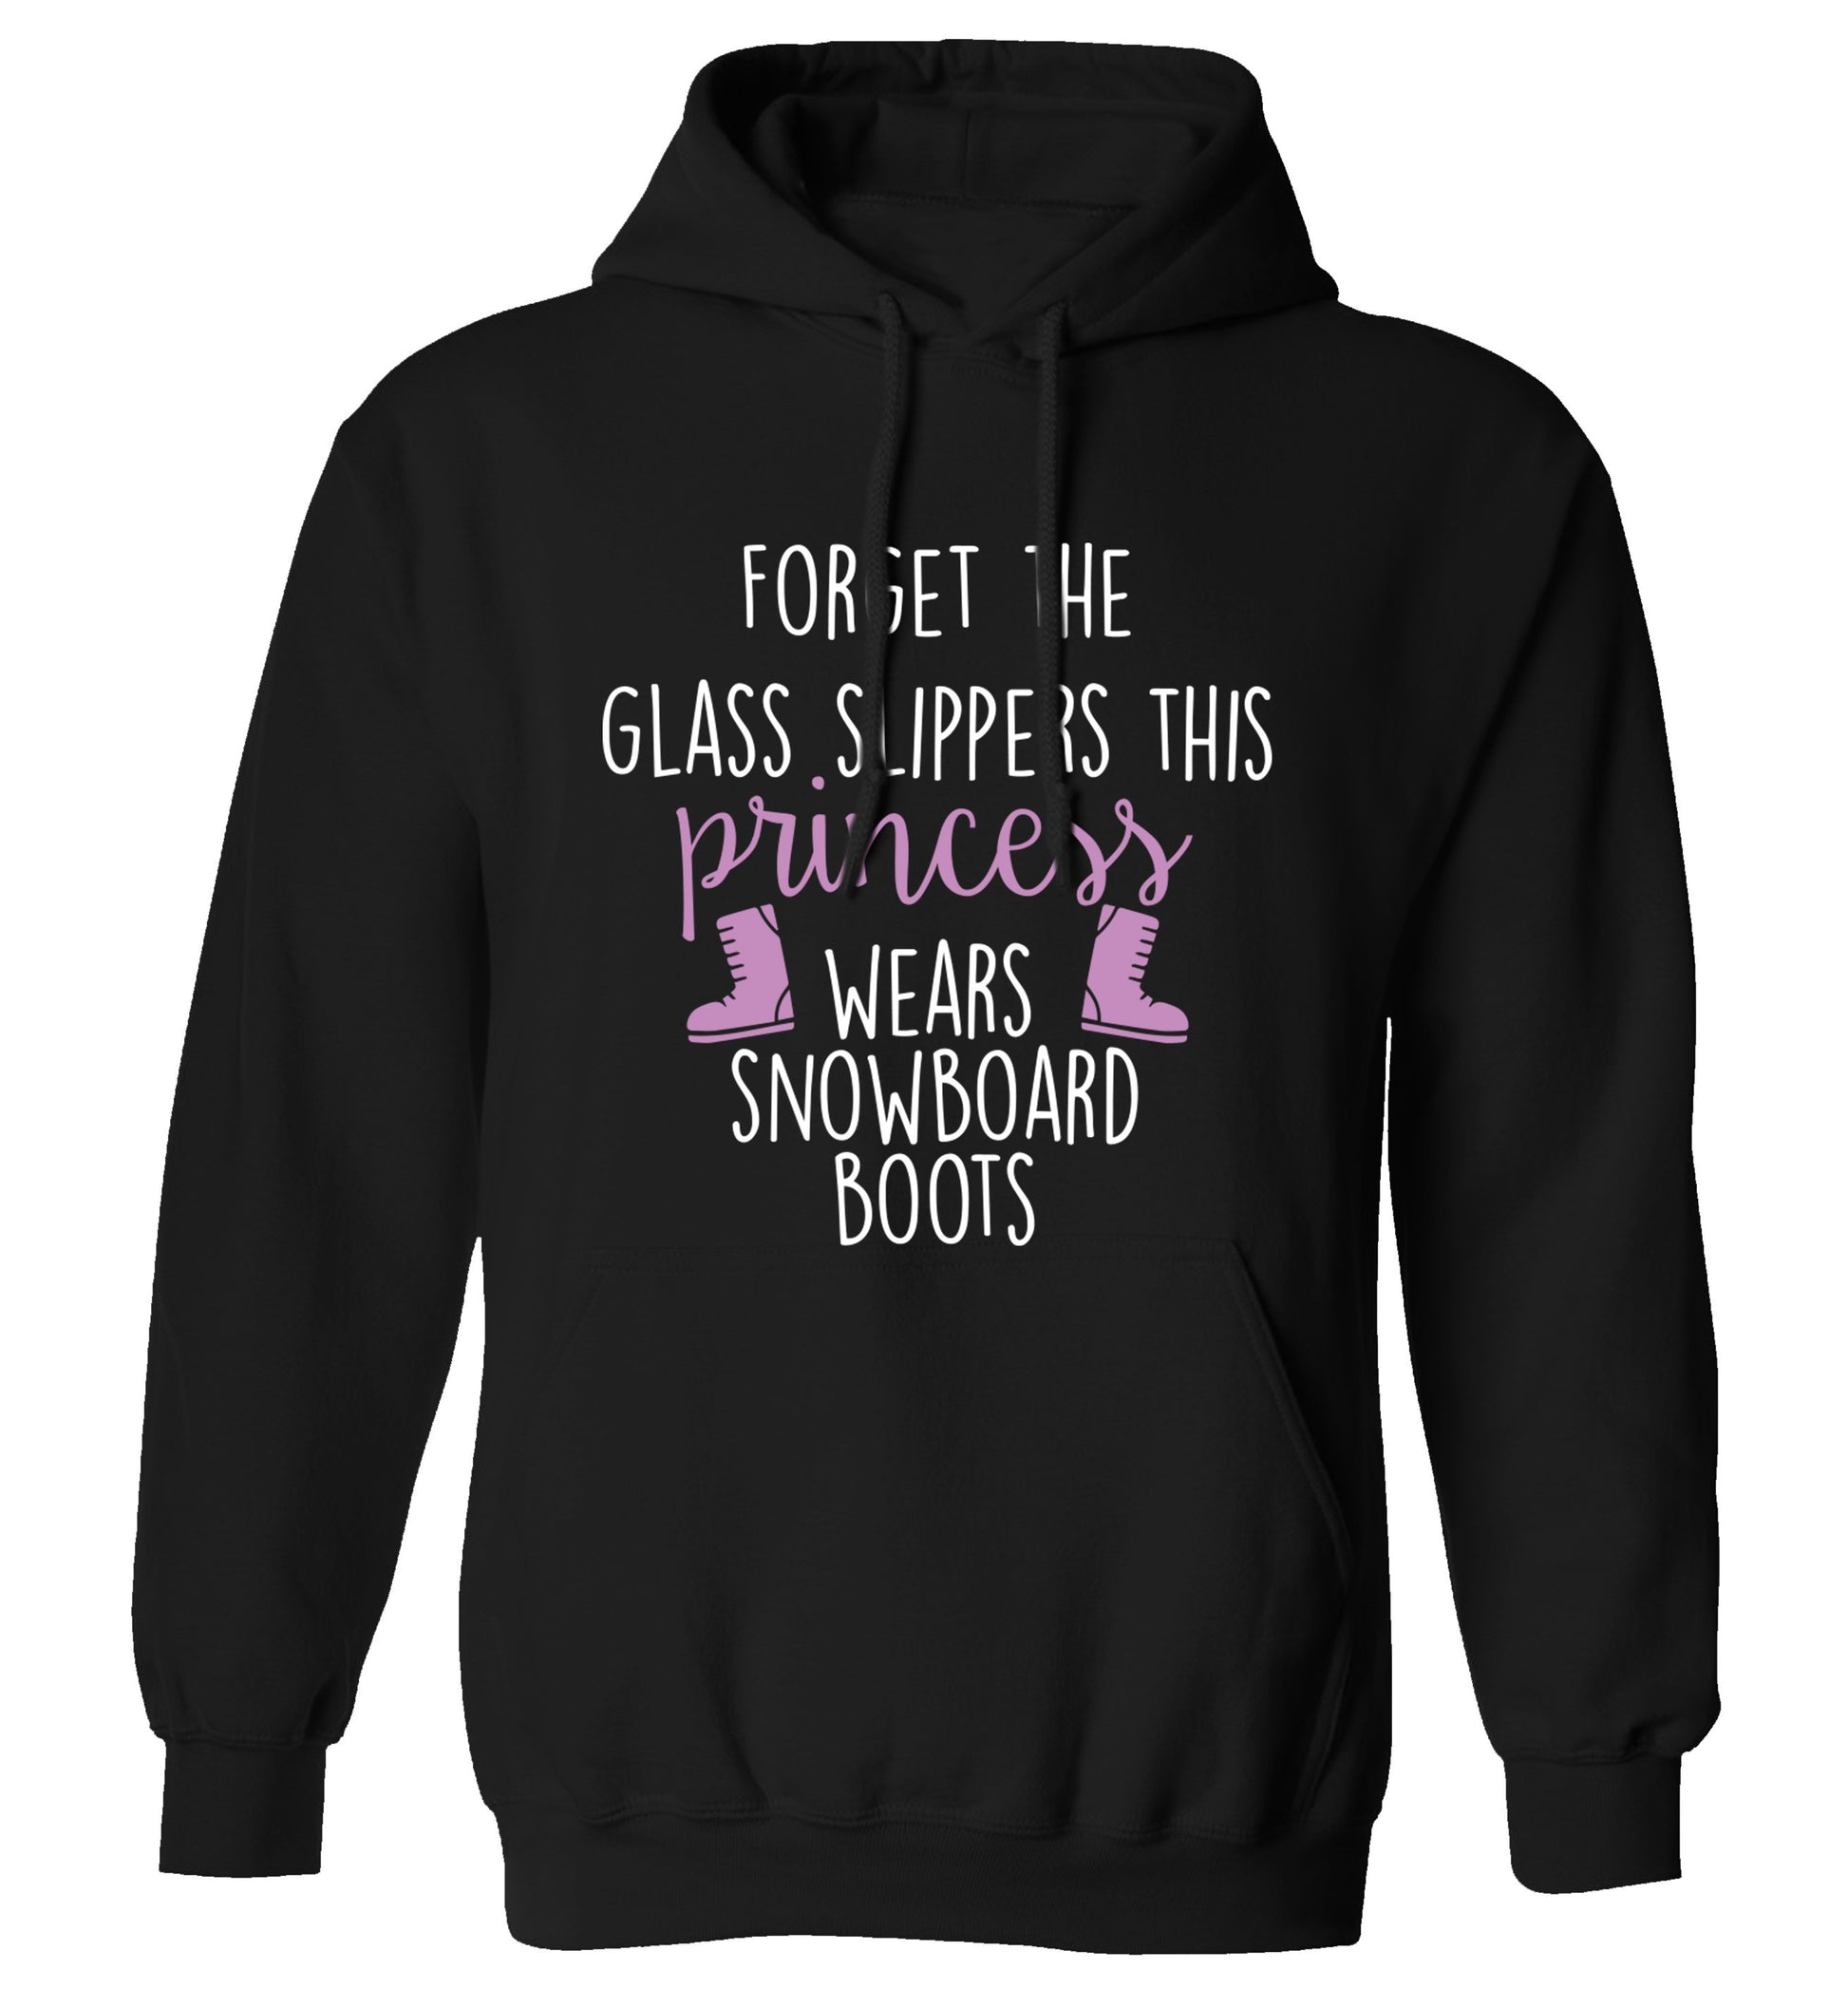 Forget the glass slippers this princess wears snowboard boots adults unisex black hoodie 2XL